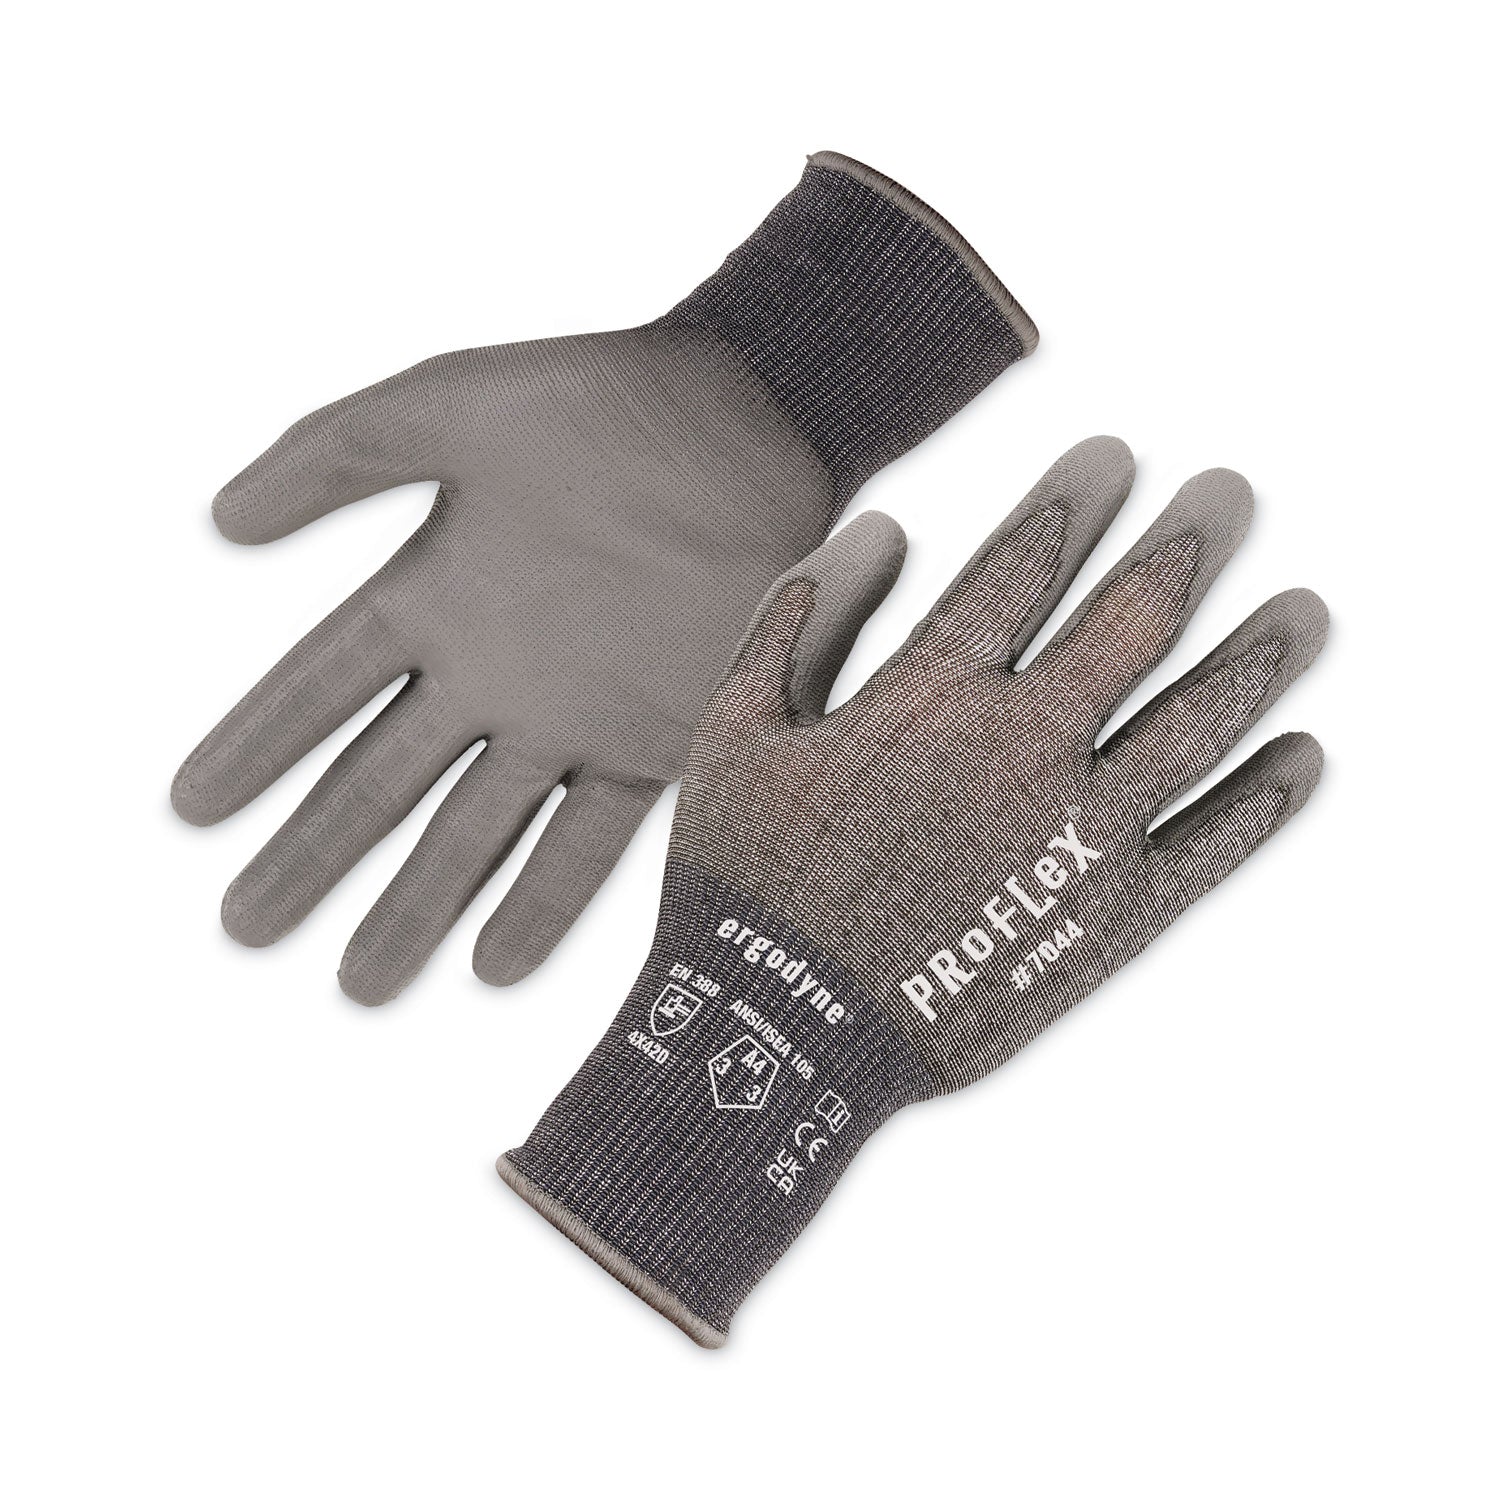 proflex-7044-ansi-a4-pu-coated-cr-gloves-gray-large-12-pairs-pack-ships-in-1-3-business-days_ego10484 - 1